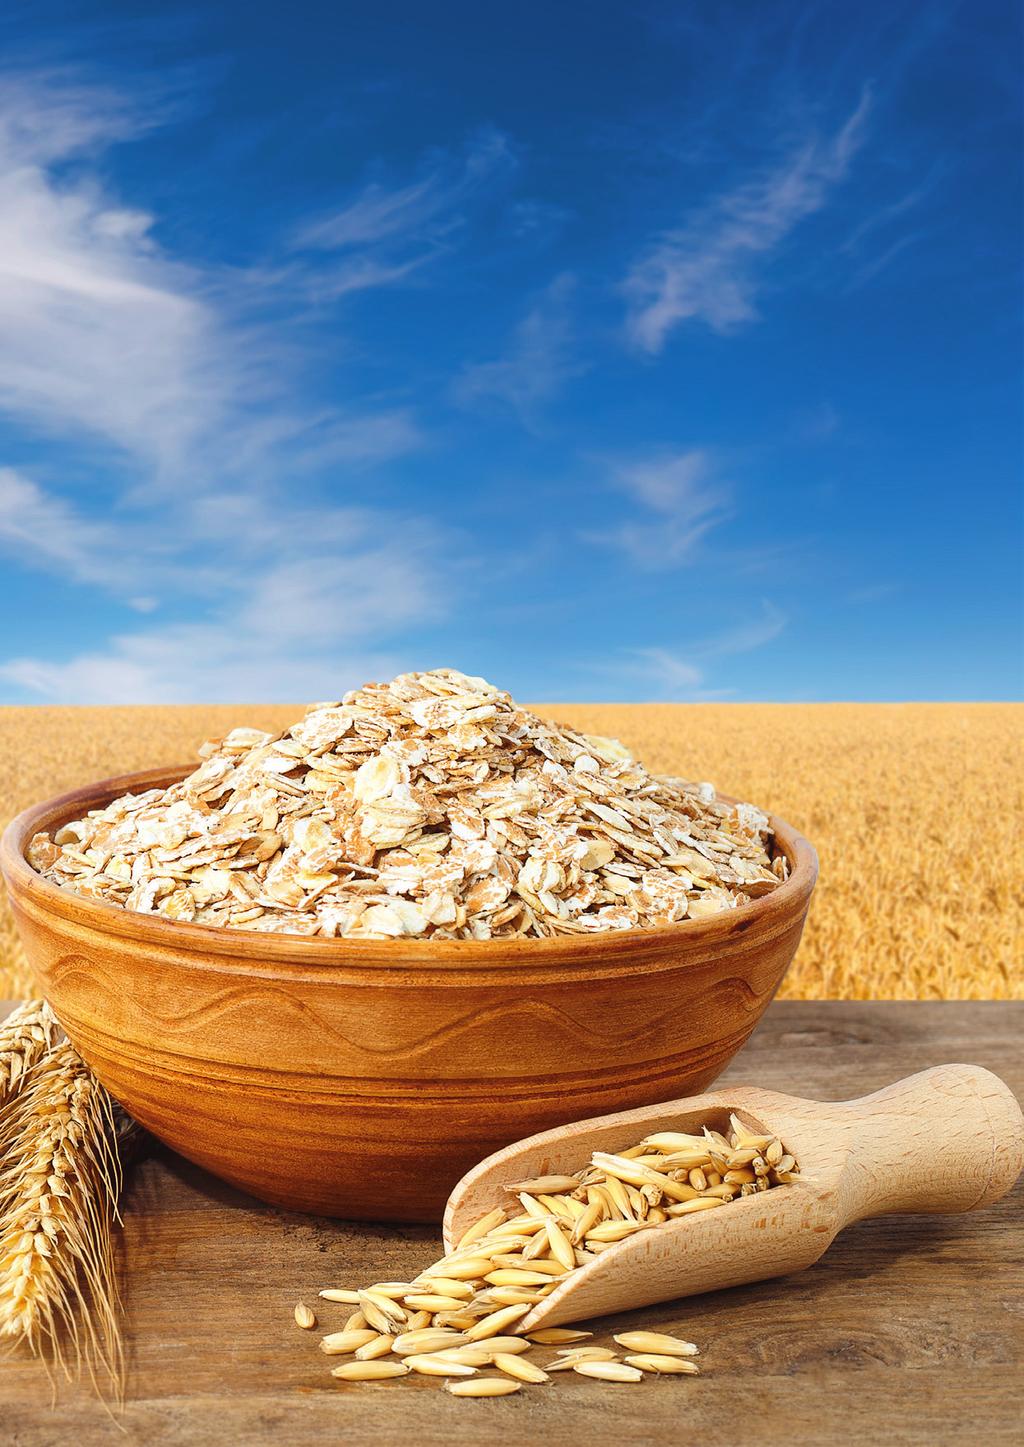 High-quality Oat Products.